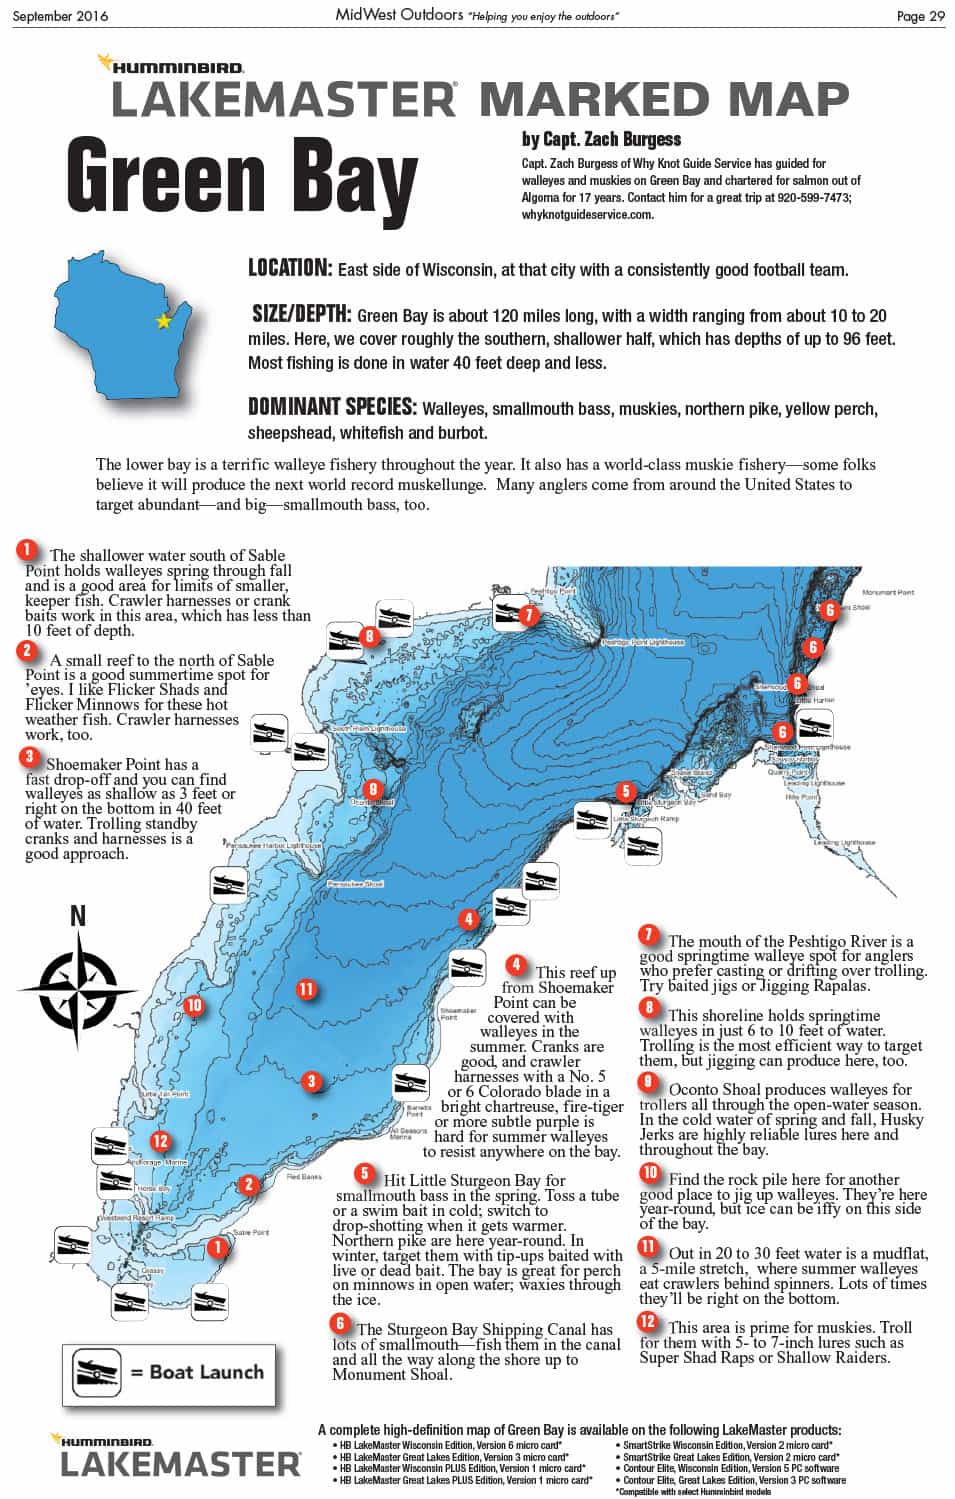 Green Bay Marked Map - MidWest Outdoors